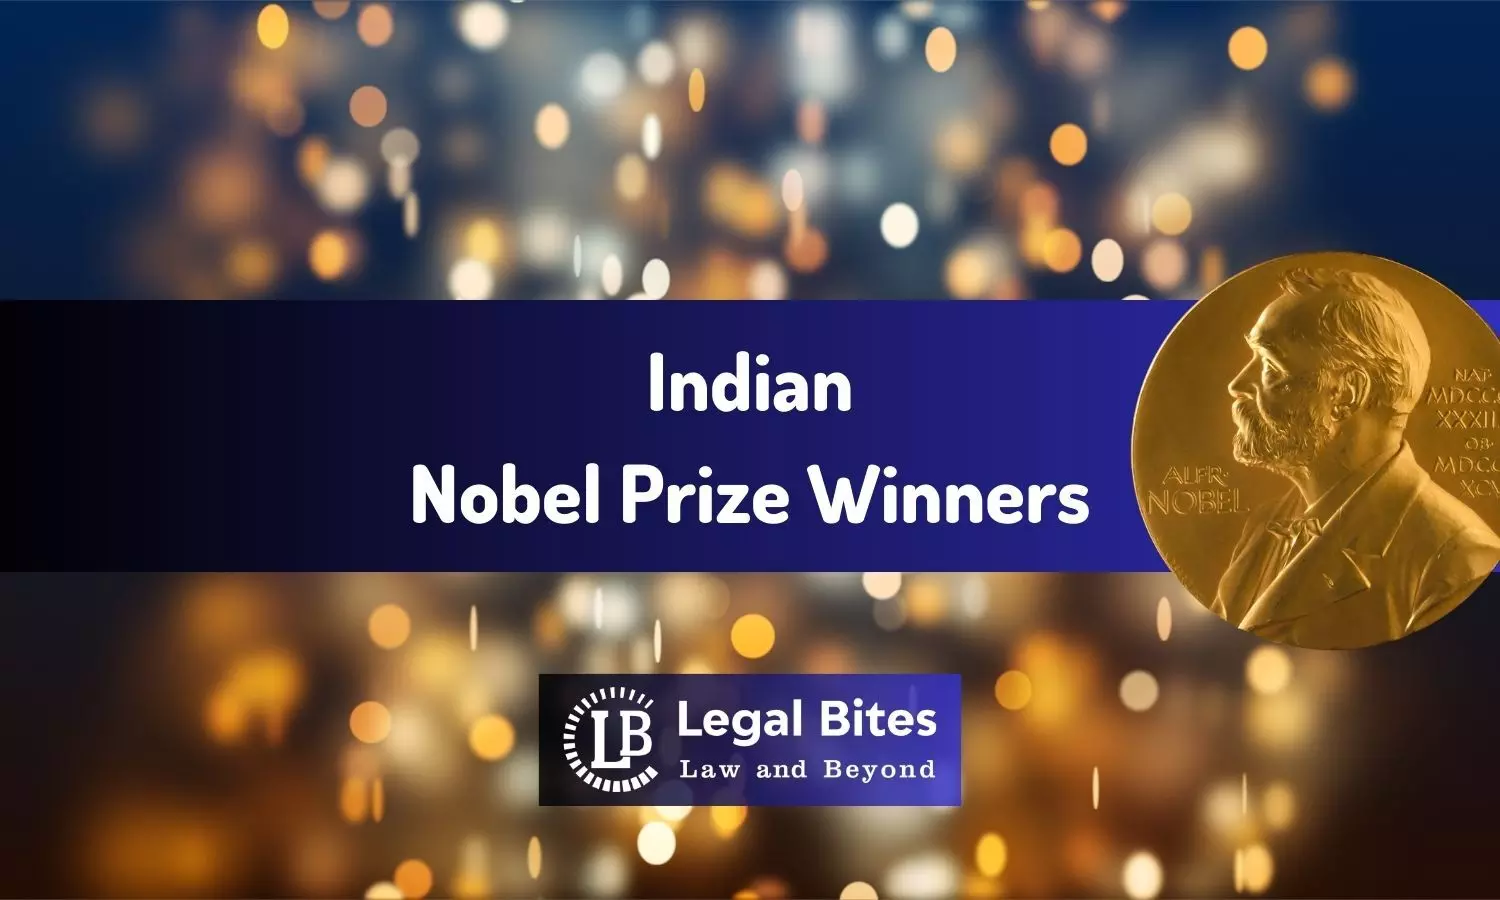 Indian Nobel Prize Winners - All You Need to Know